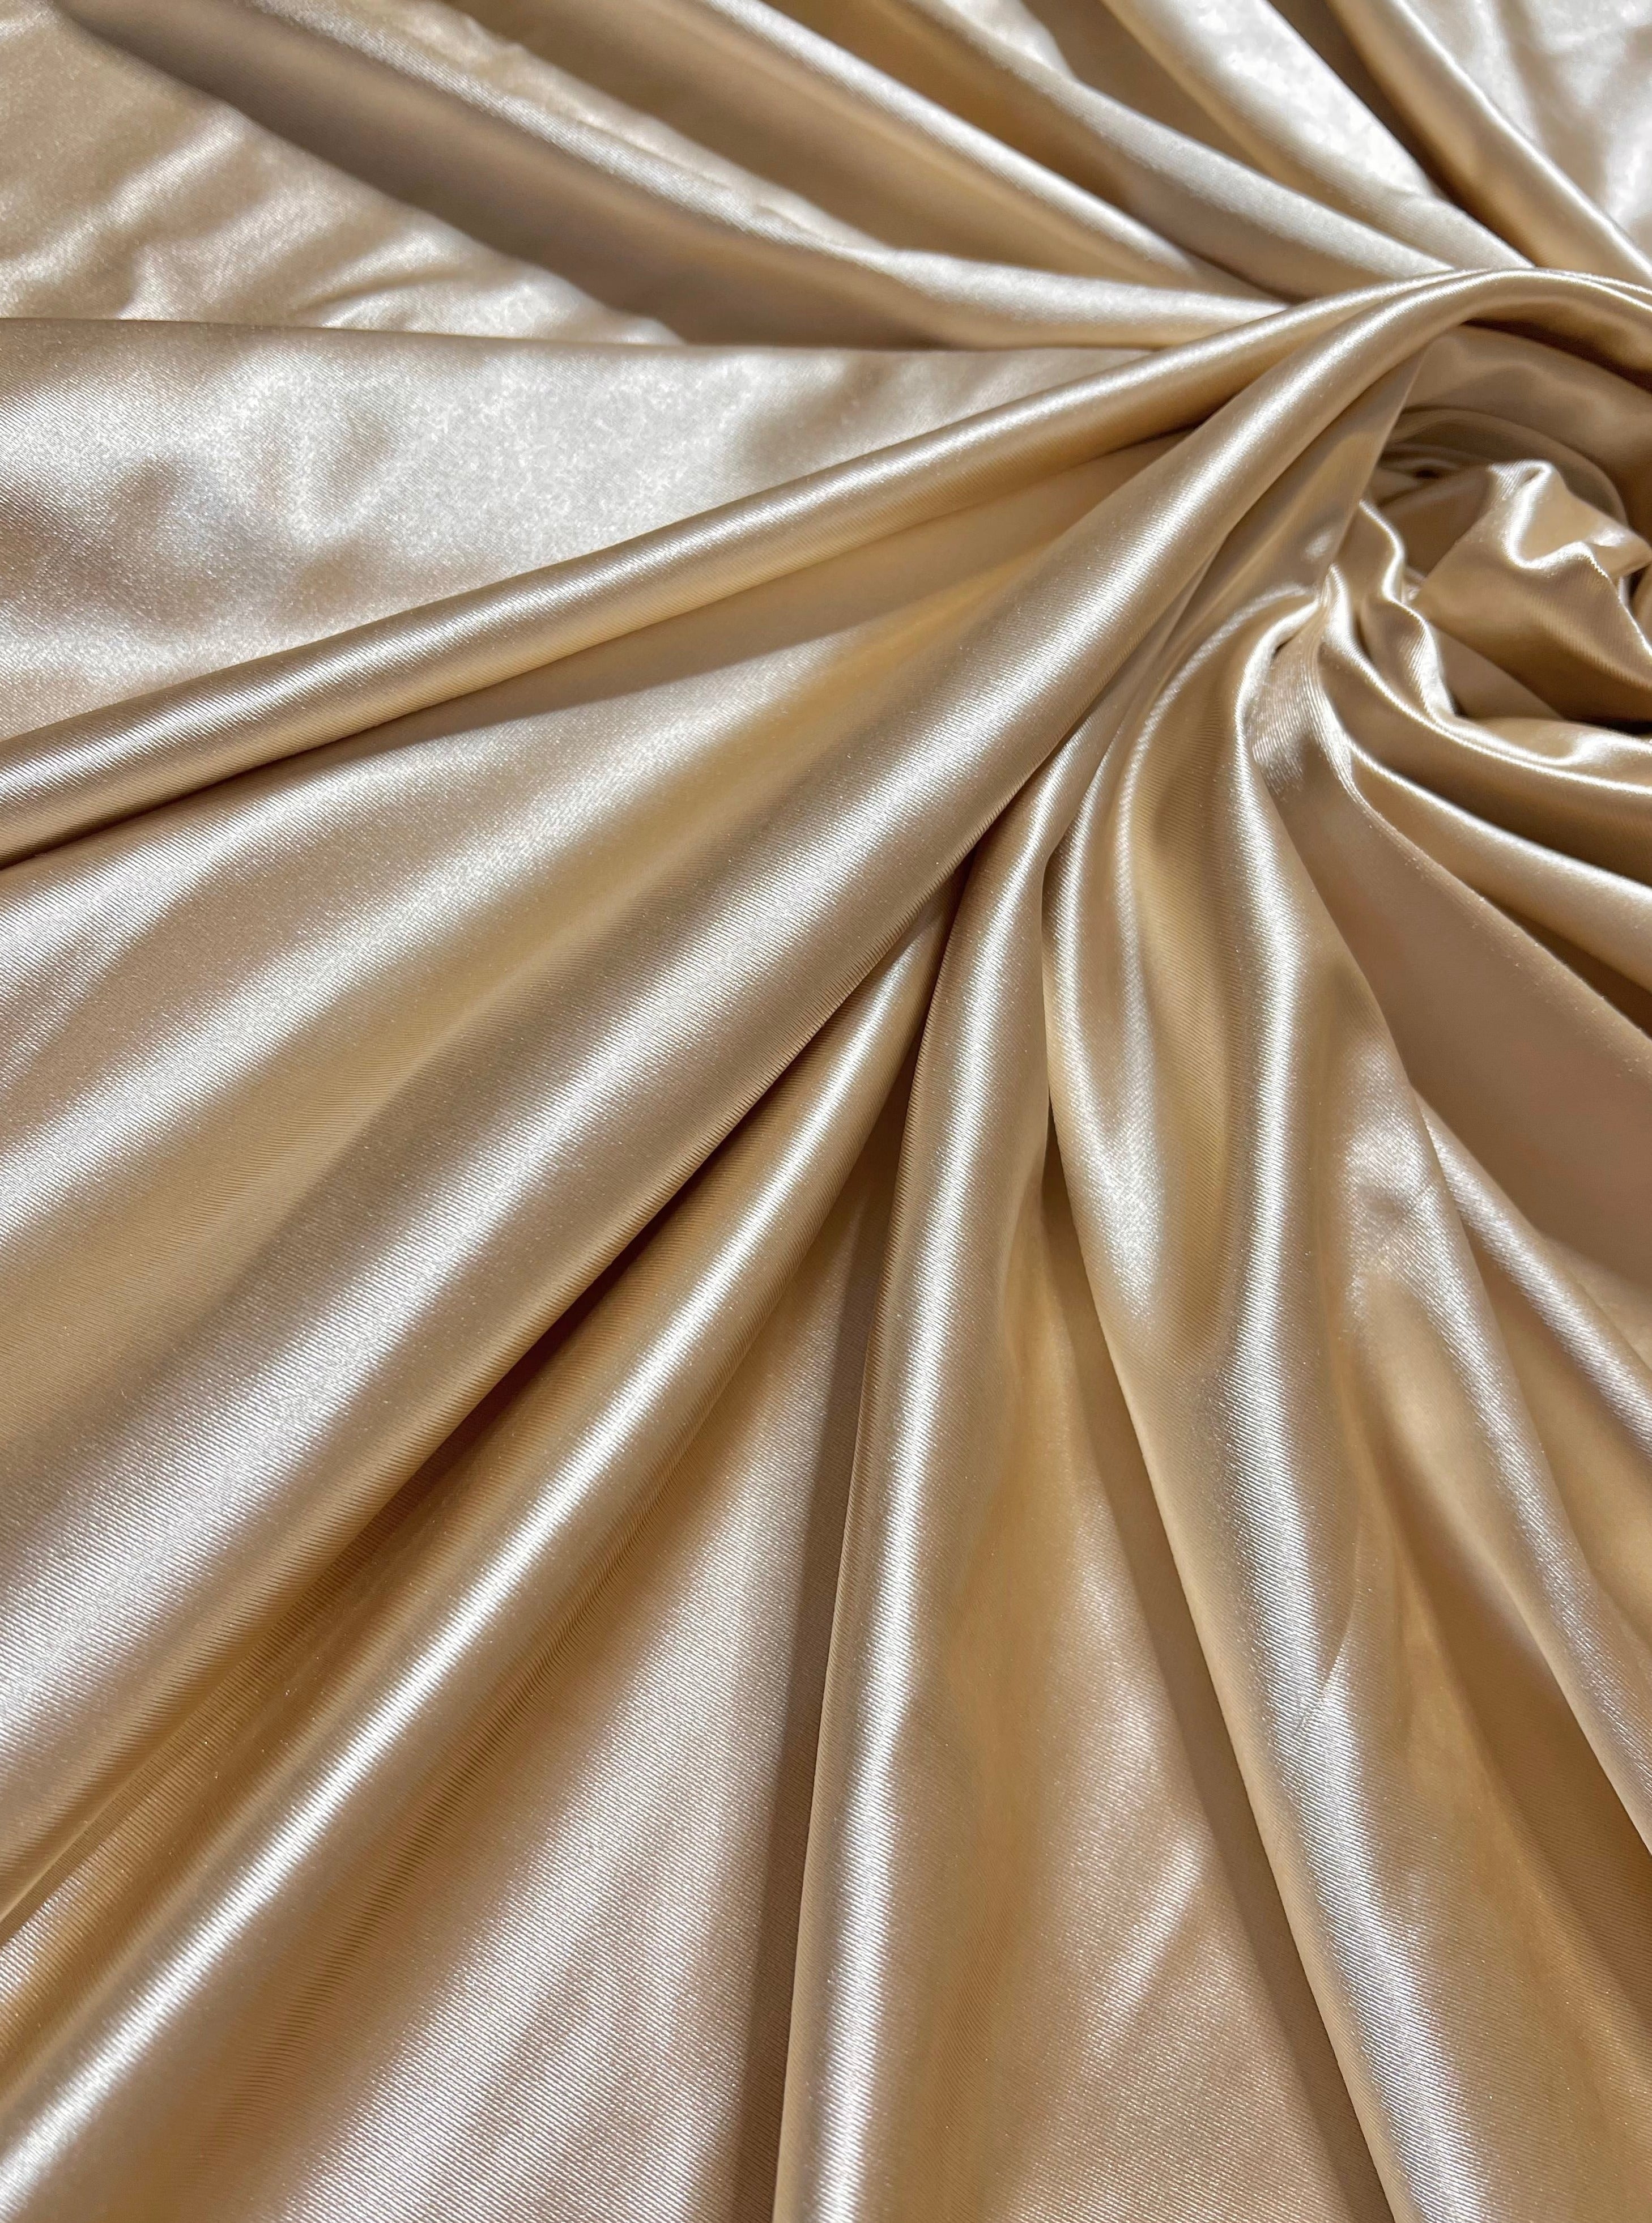 taupe nylon spandex, taupe color fabric, gold nylon spandex, light gold spandex, gold stretch fabric, gold fabric for legging, fabric wholesale USA, online fabric for legging, 4 way stretch fabric,premium nylon spandex, nylon spandex for woman, nylon spandex for bride, nylon spandex on discount, nylon spandex on sale, buy nylon spandex online